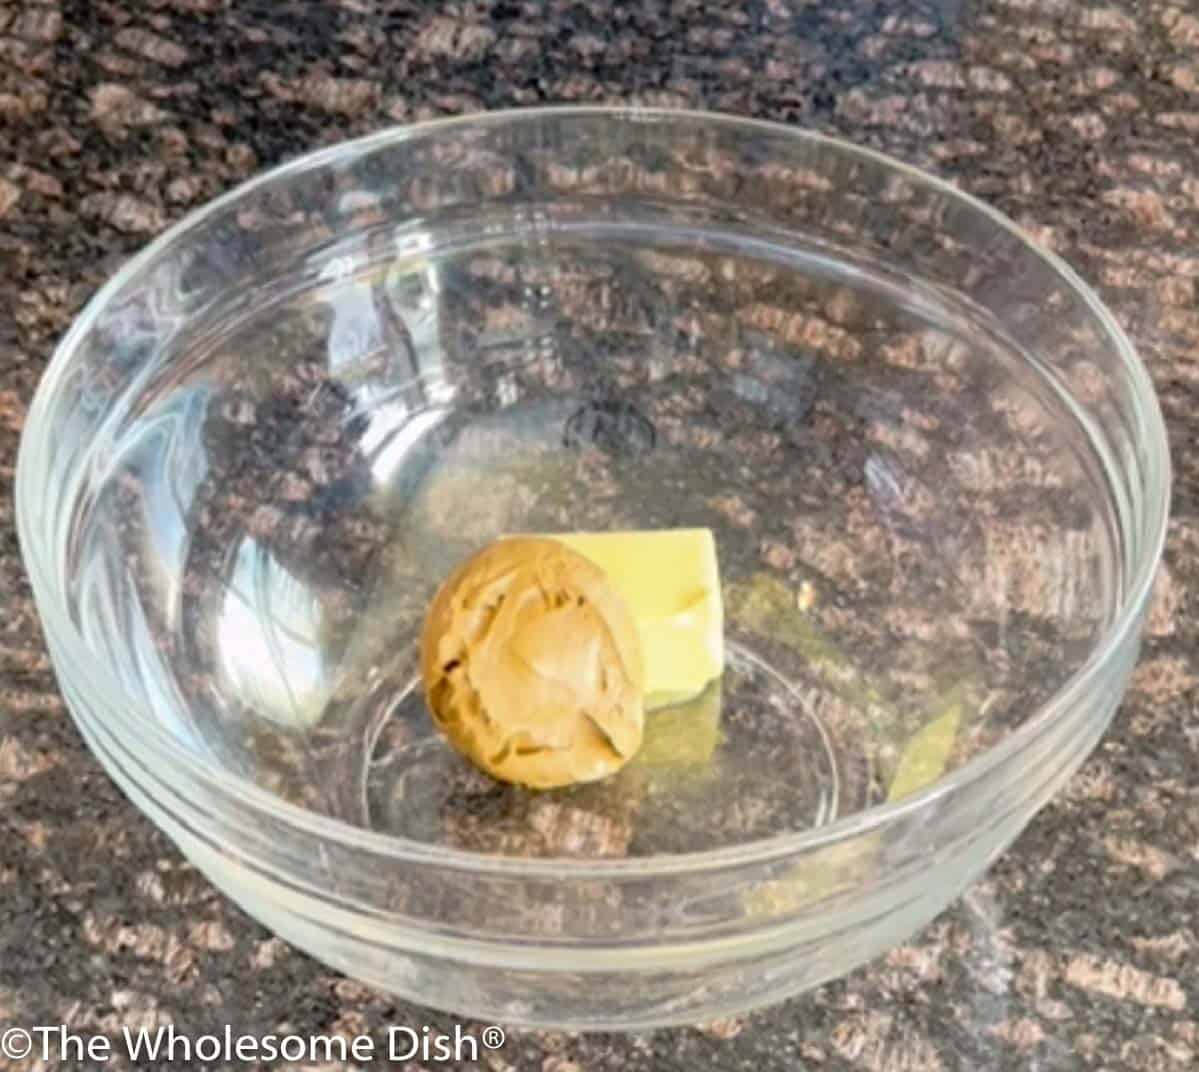 Butter and peanut butter in a large glass mixing bowl.